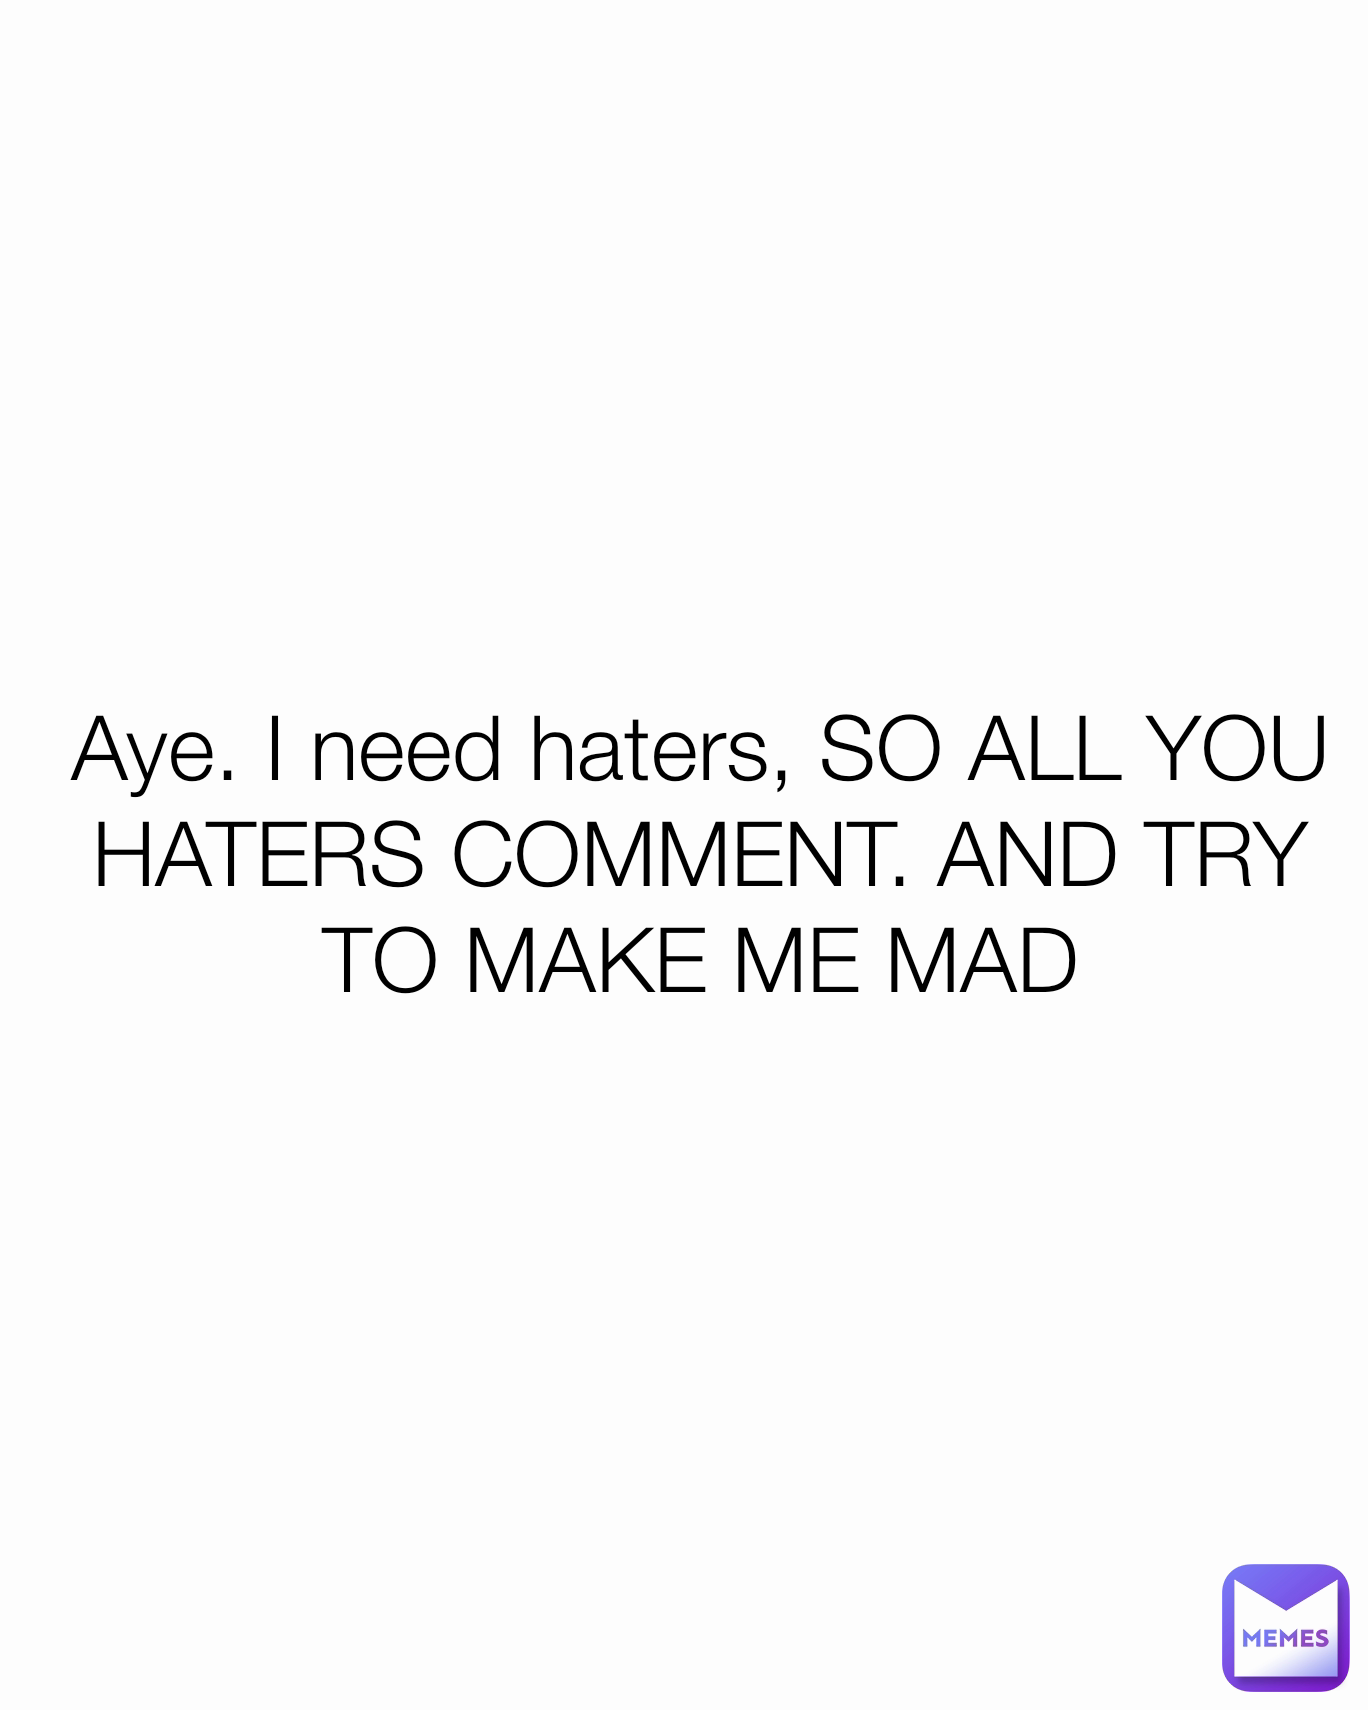 Aye. I need haters, SO ALL YOU HATERS COMMENT. AND TRY TO MAKE ME MAD